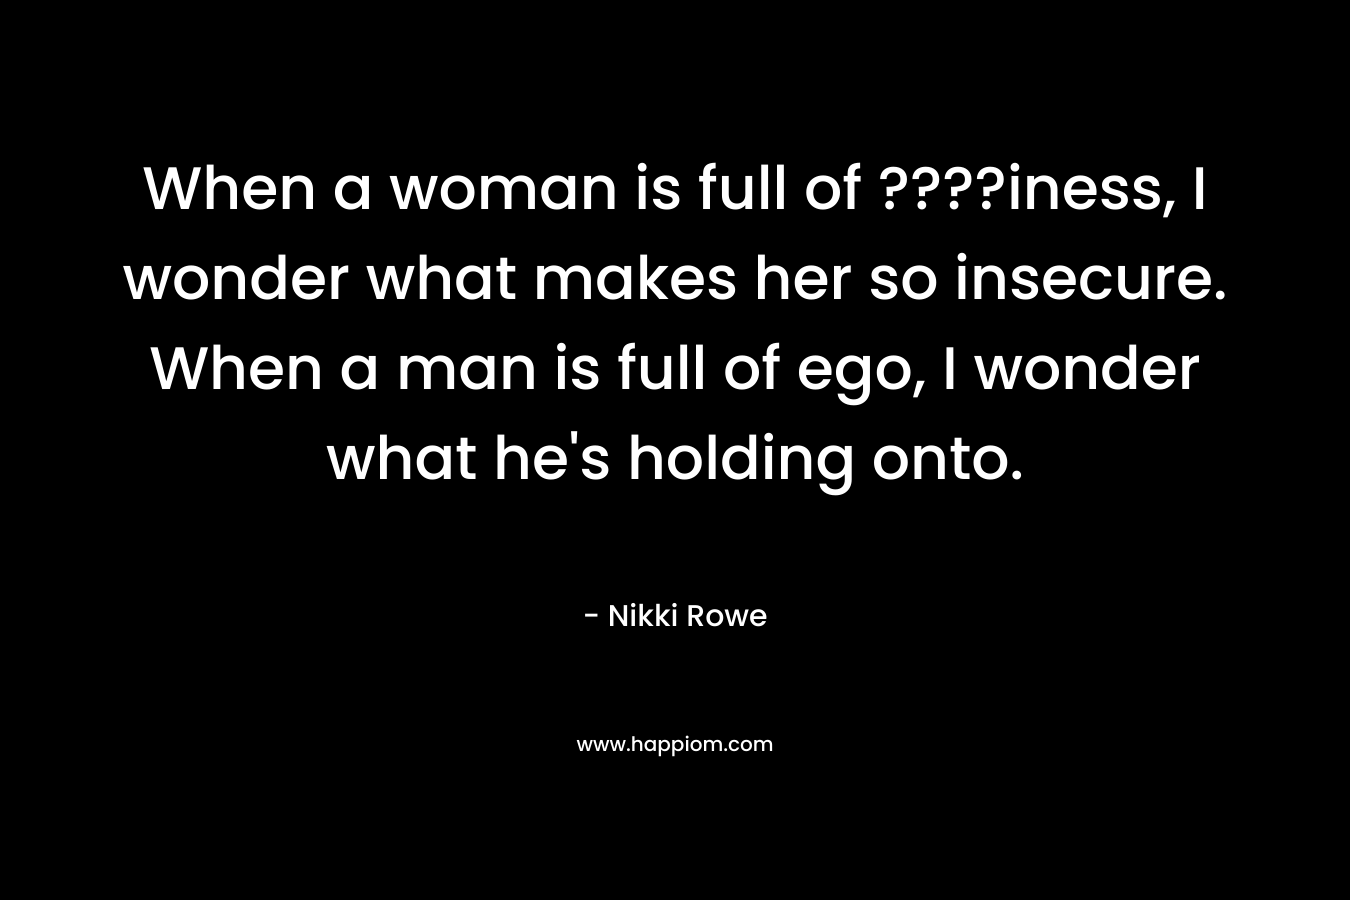 When a woman is full of ????iness, I wonder what makes her so insecure. When a man is full of ego, I wonder what he's holding onto.